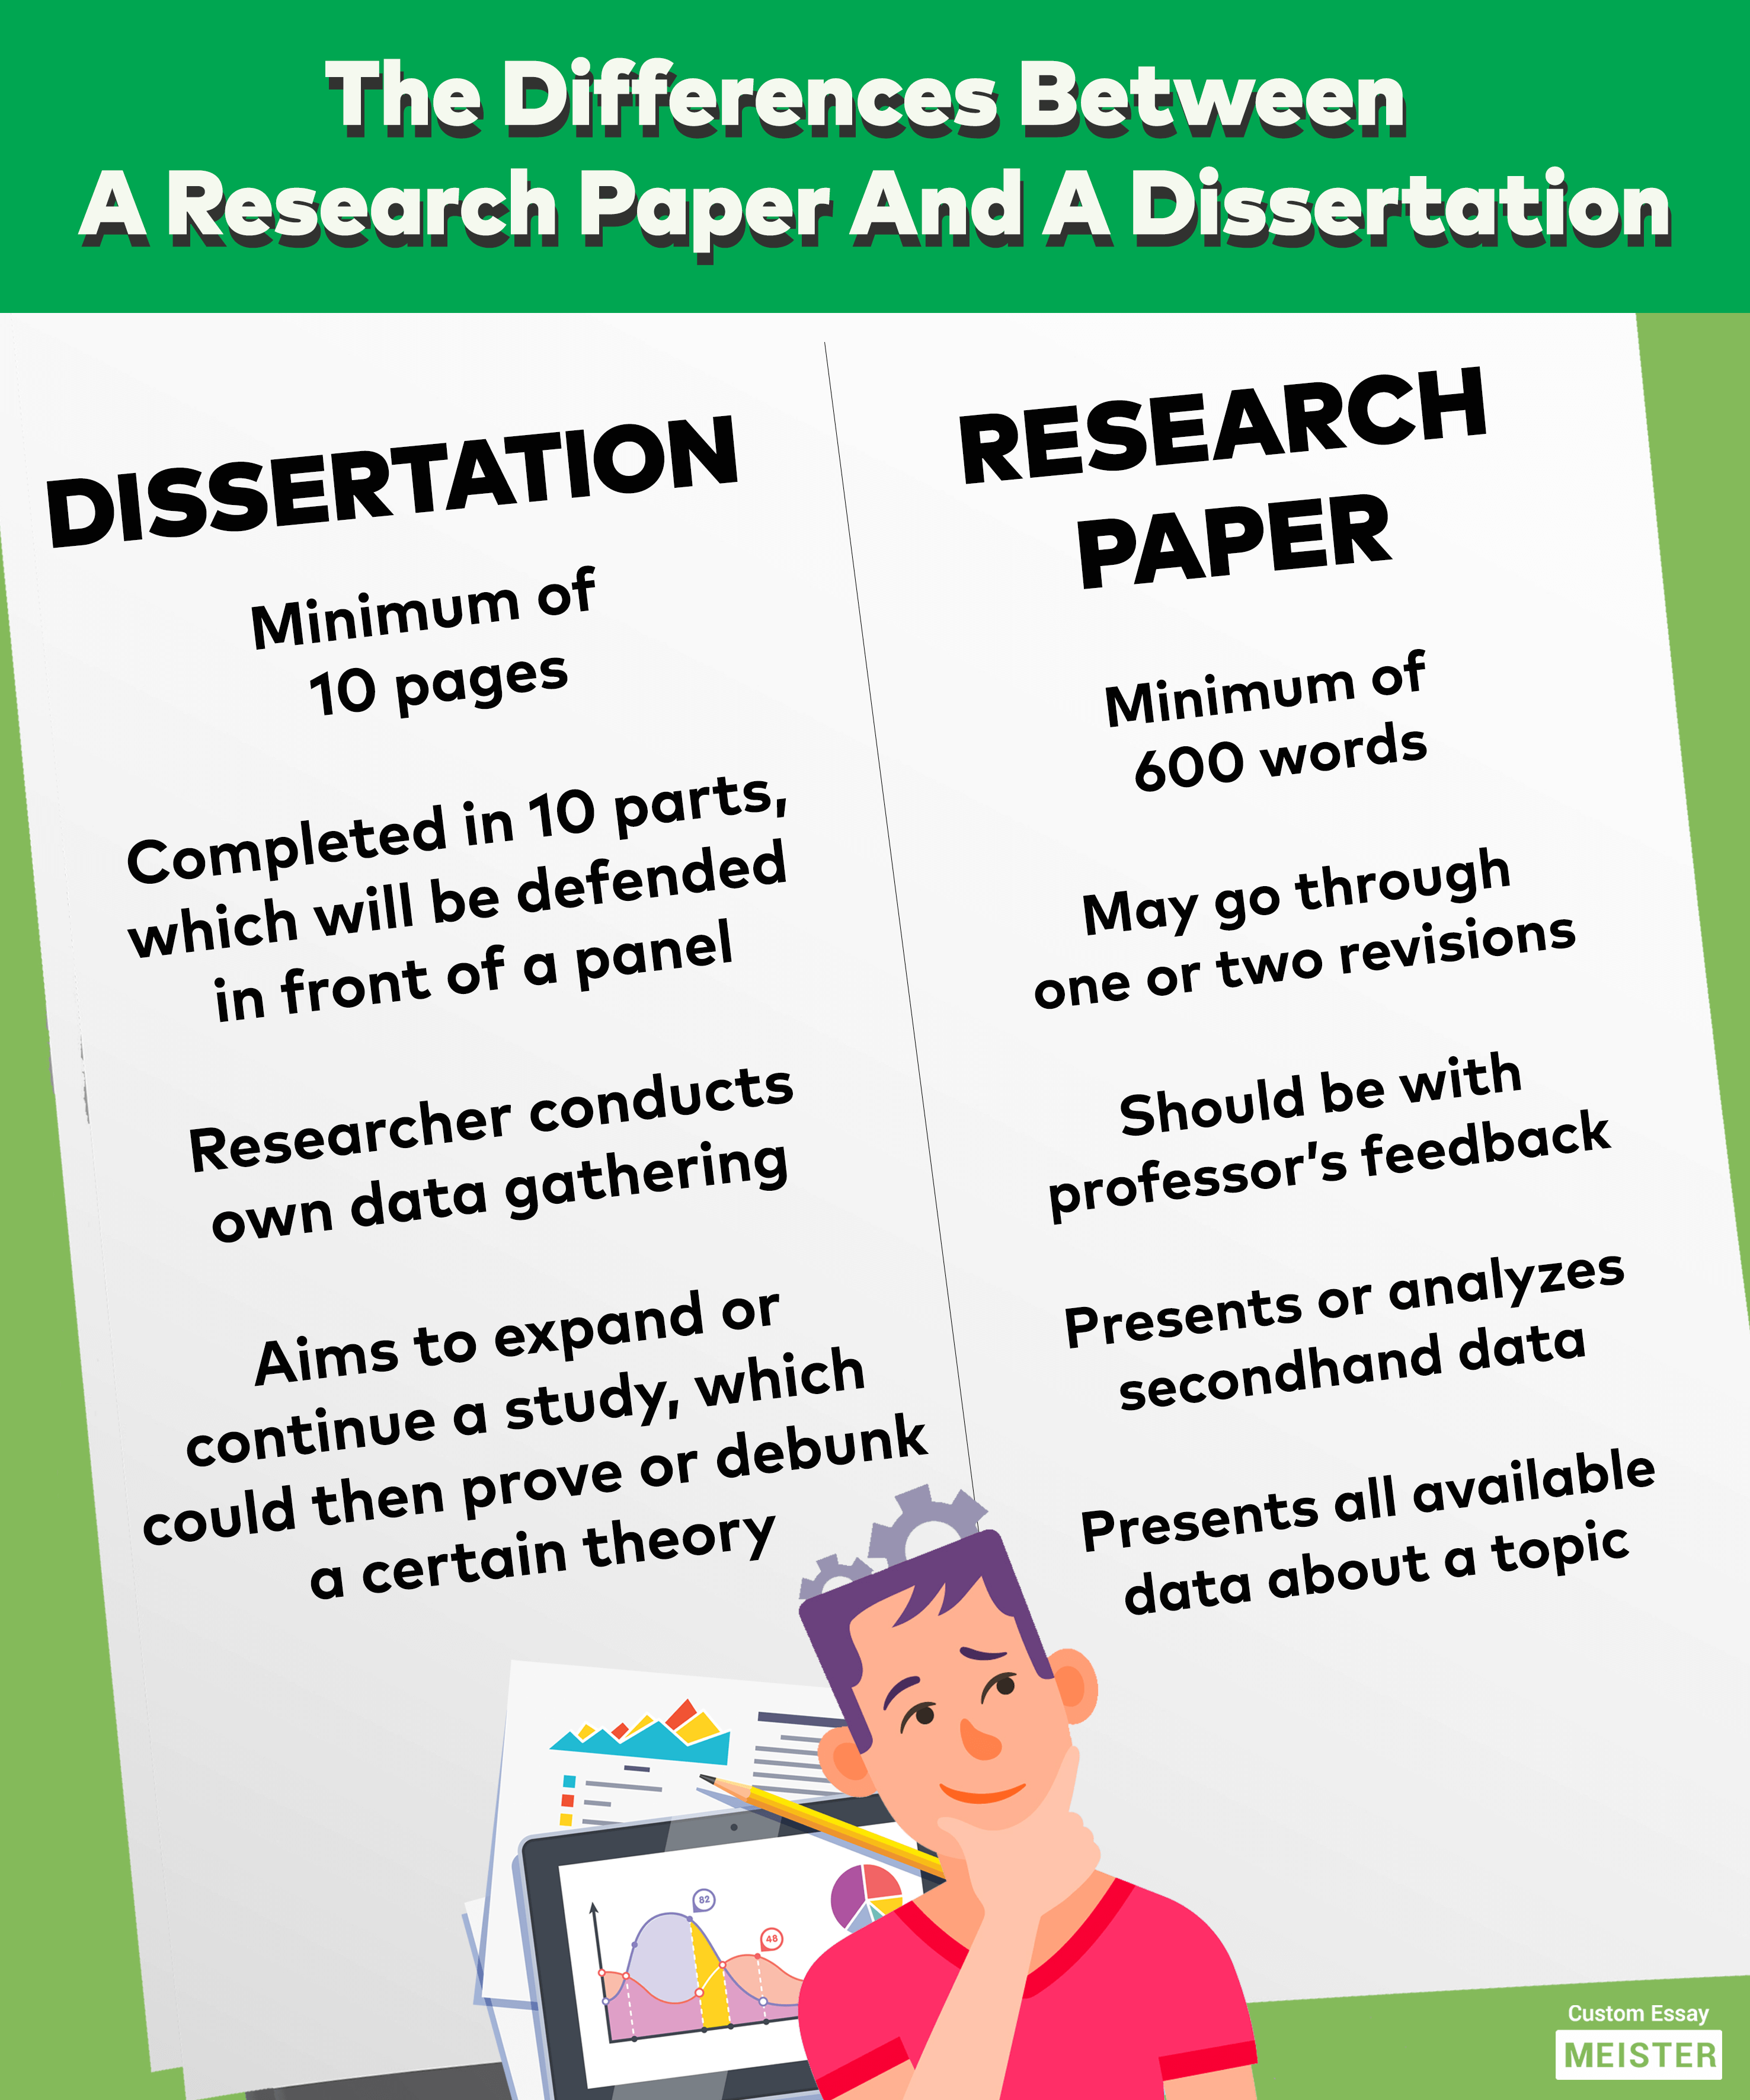 is dissertation and research paper the same